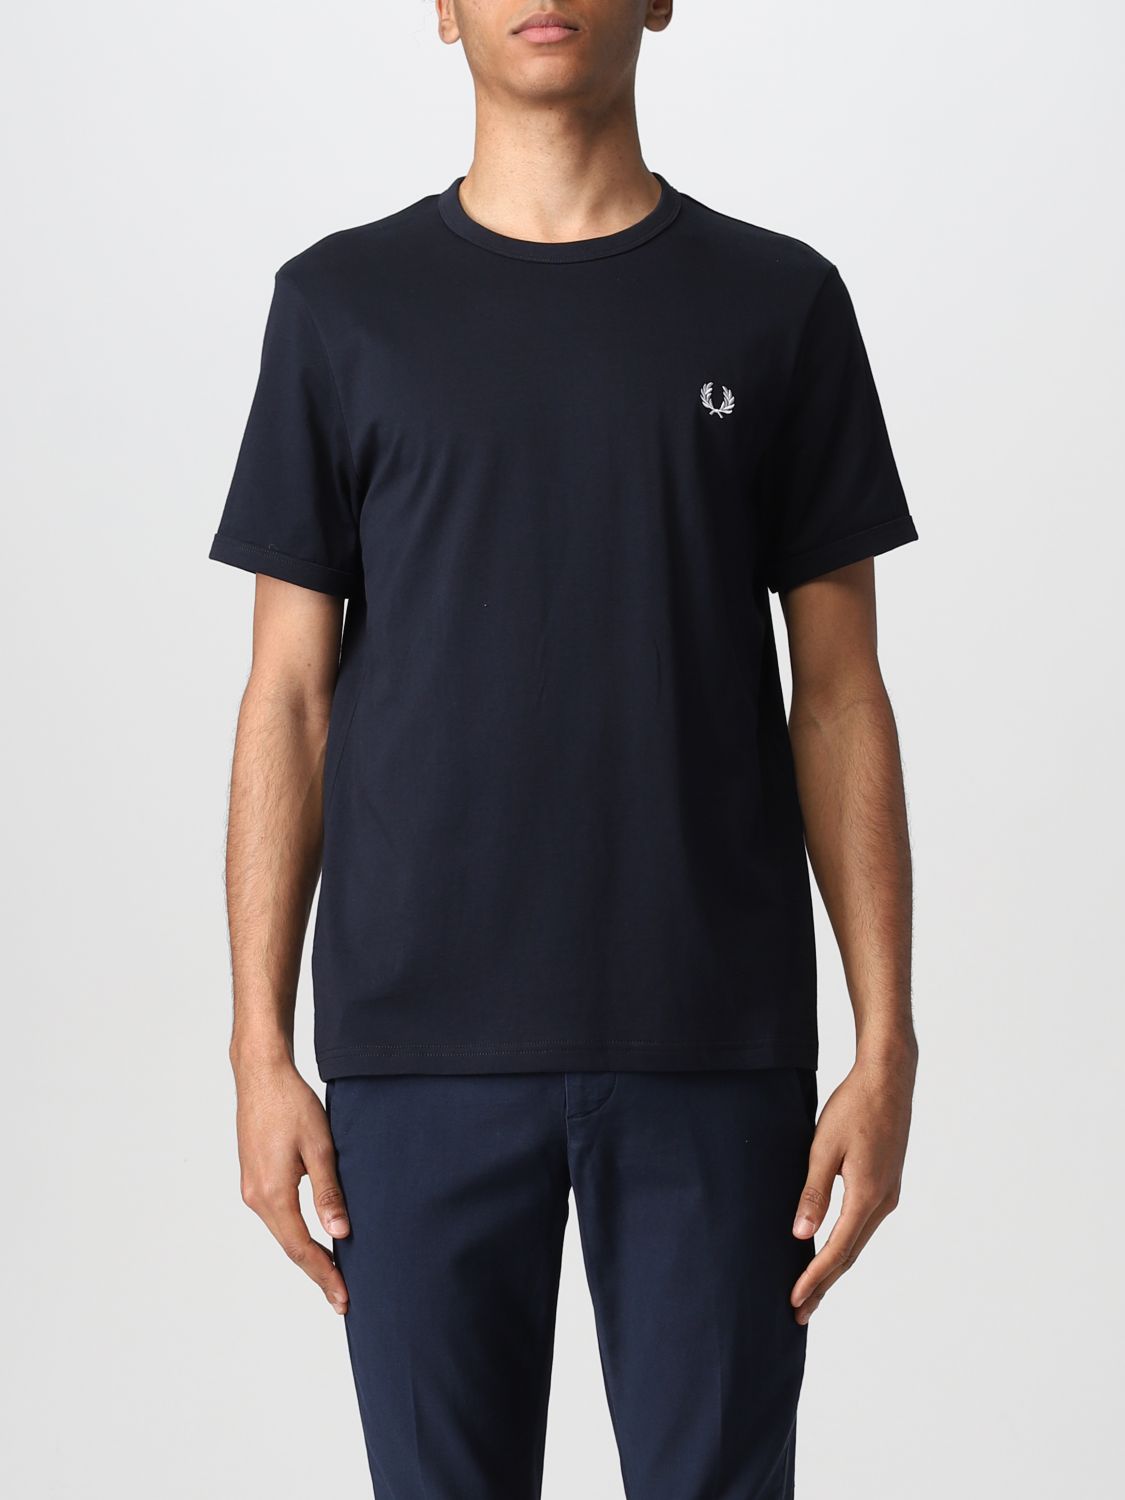 Tシャツ Fred Perry: Tシャツ メンズ Fred Perry ネイビー 1